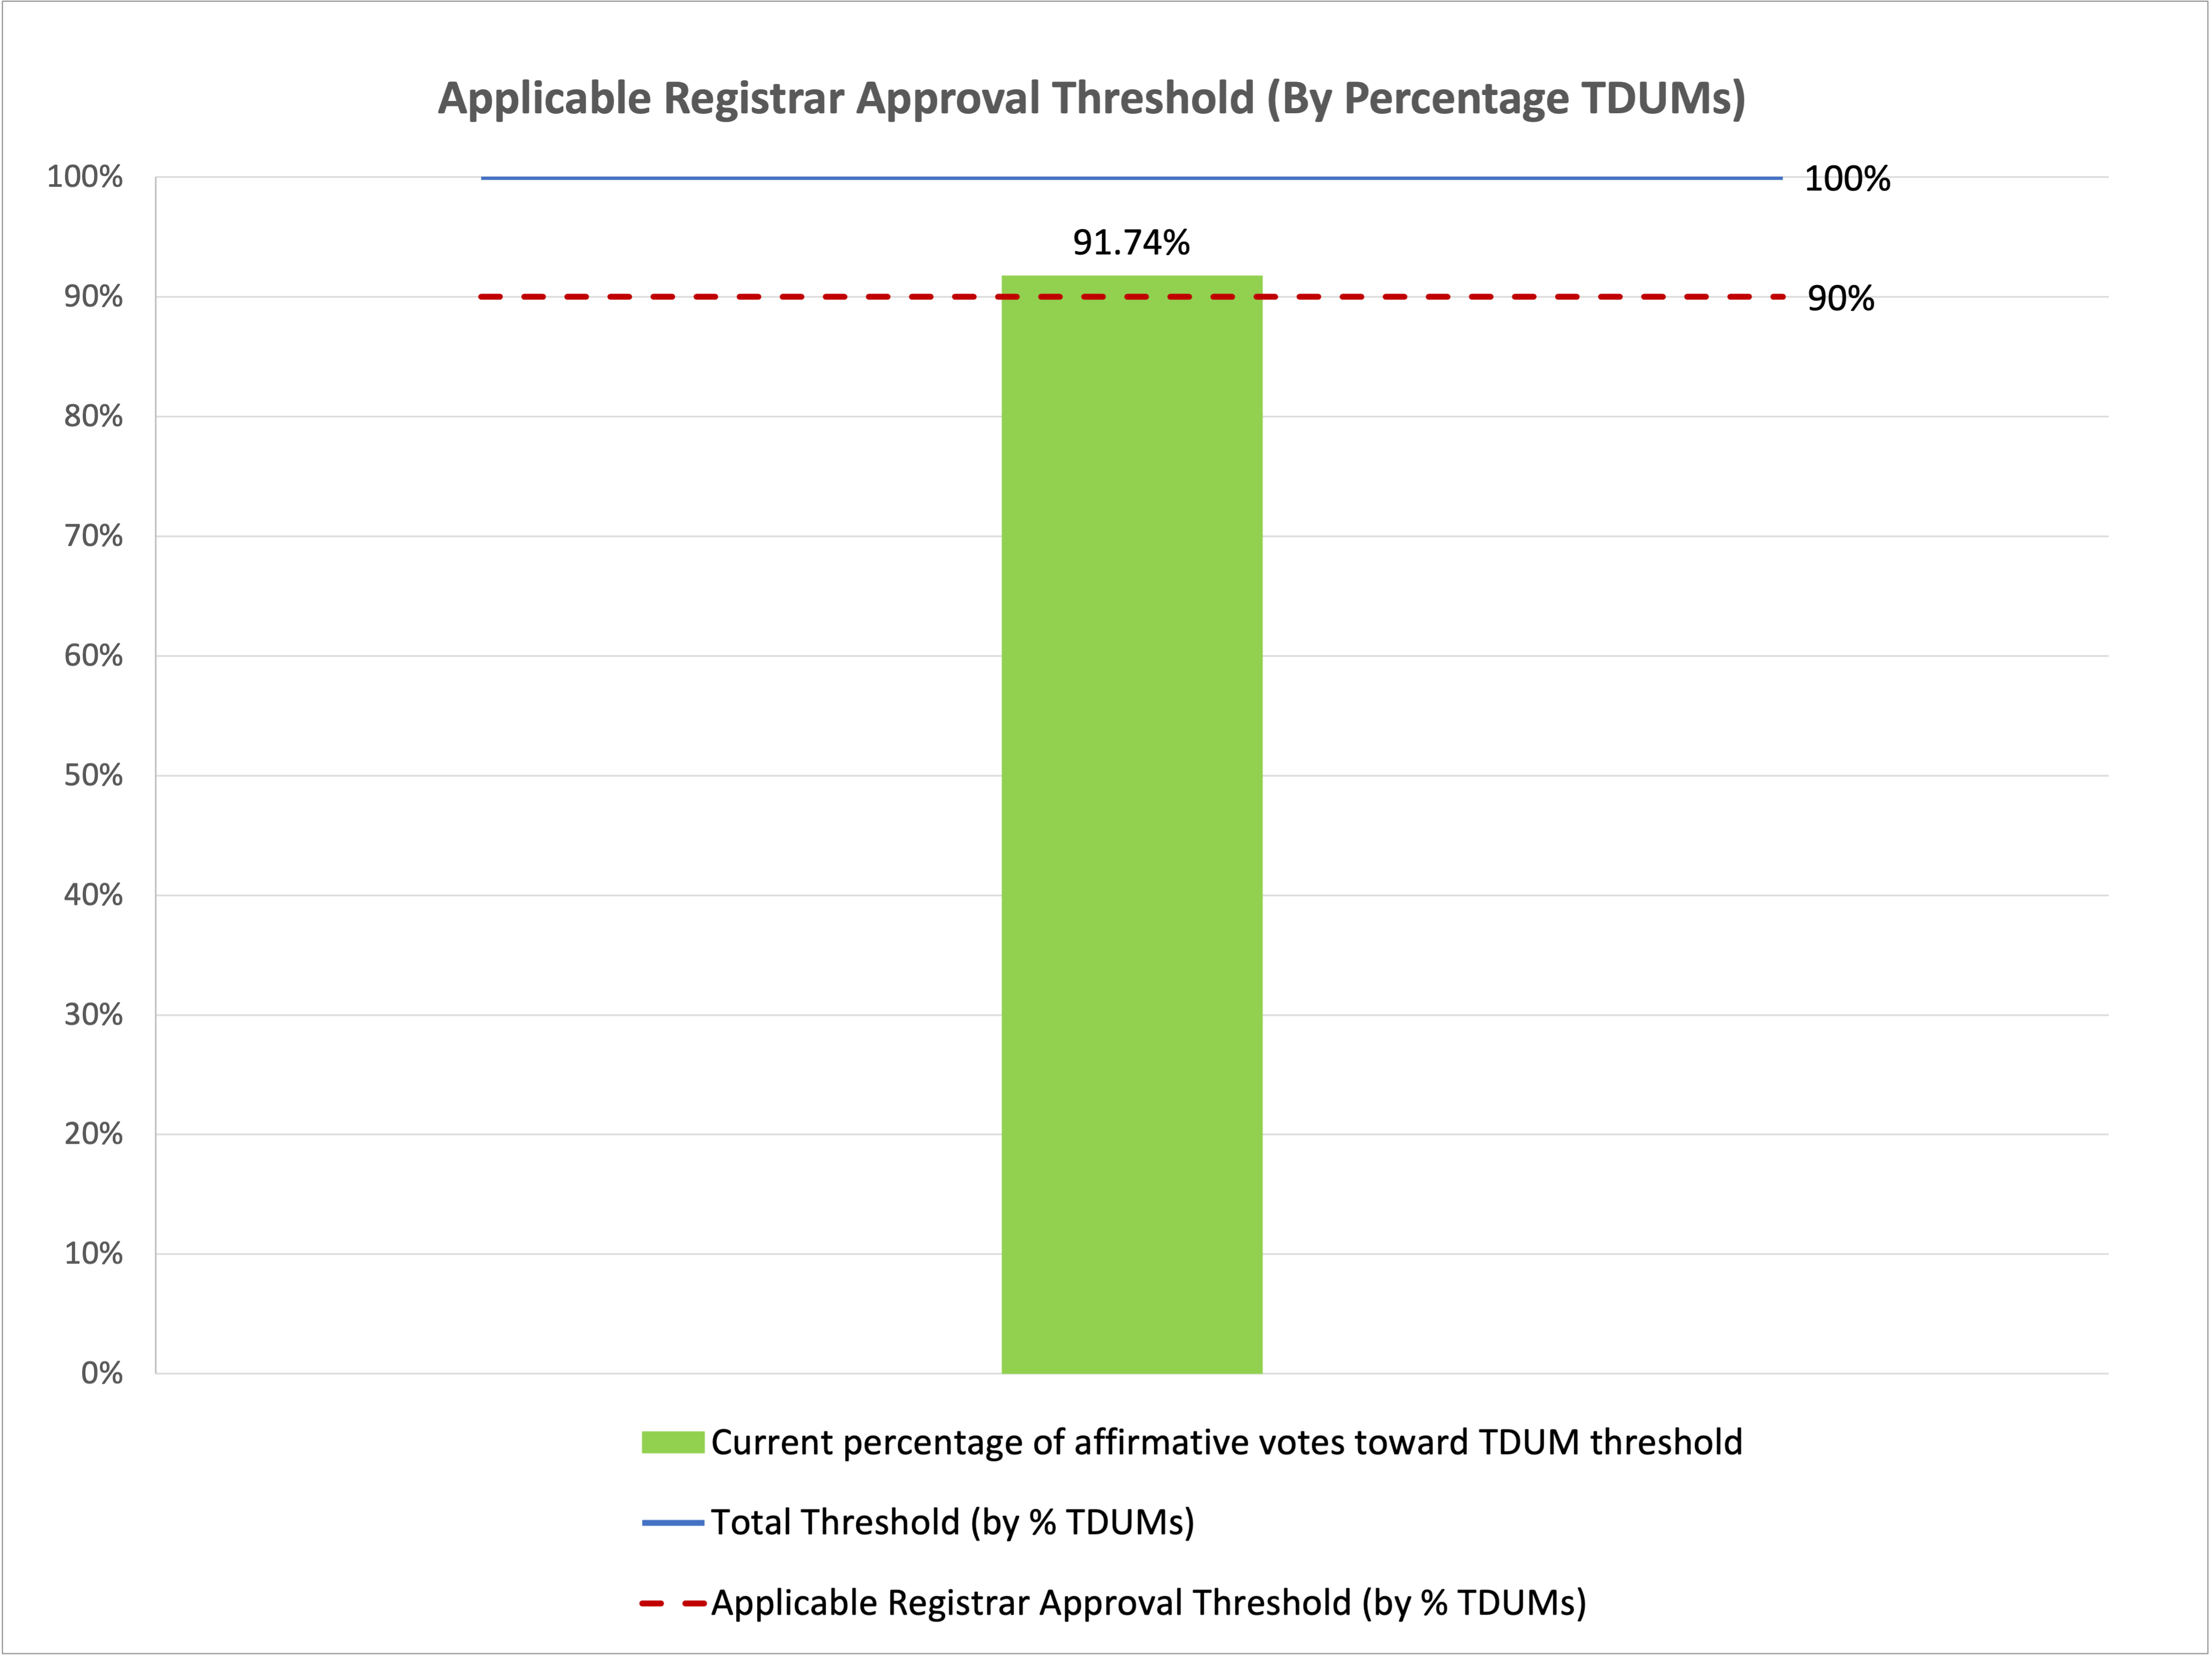 Bar chart of the progress of the vote towards the affirmative approval of the percentage of total domain names under management (TDUMs) threshold for Applicable Registrars. The TDUMs approval threshold is 90%, with current affirmative votes towards the threshold at 91.74%